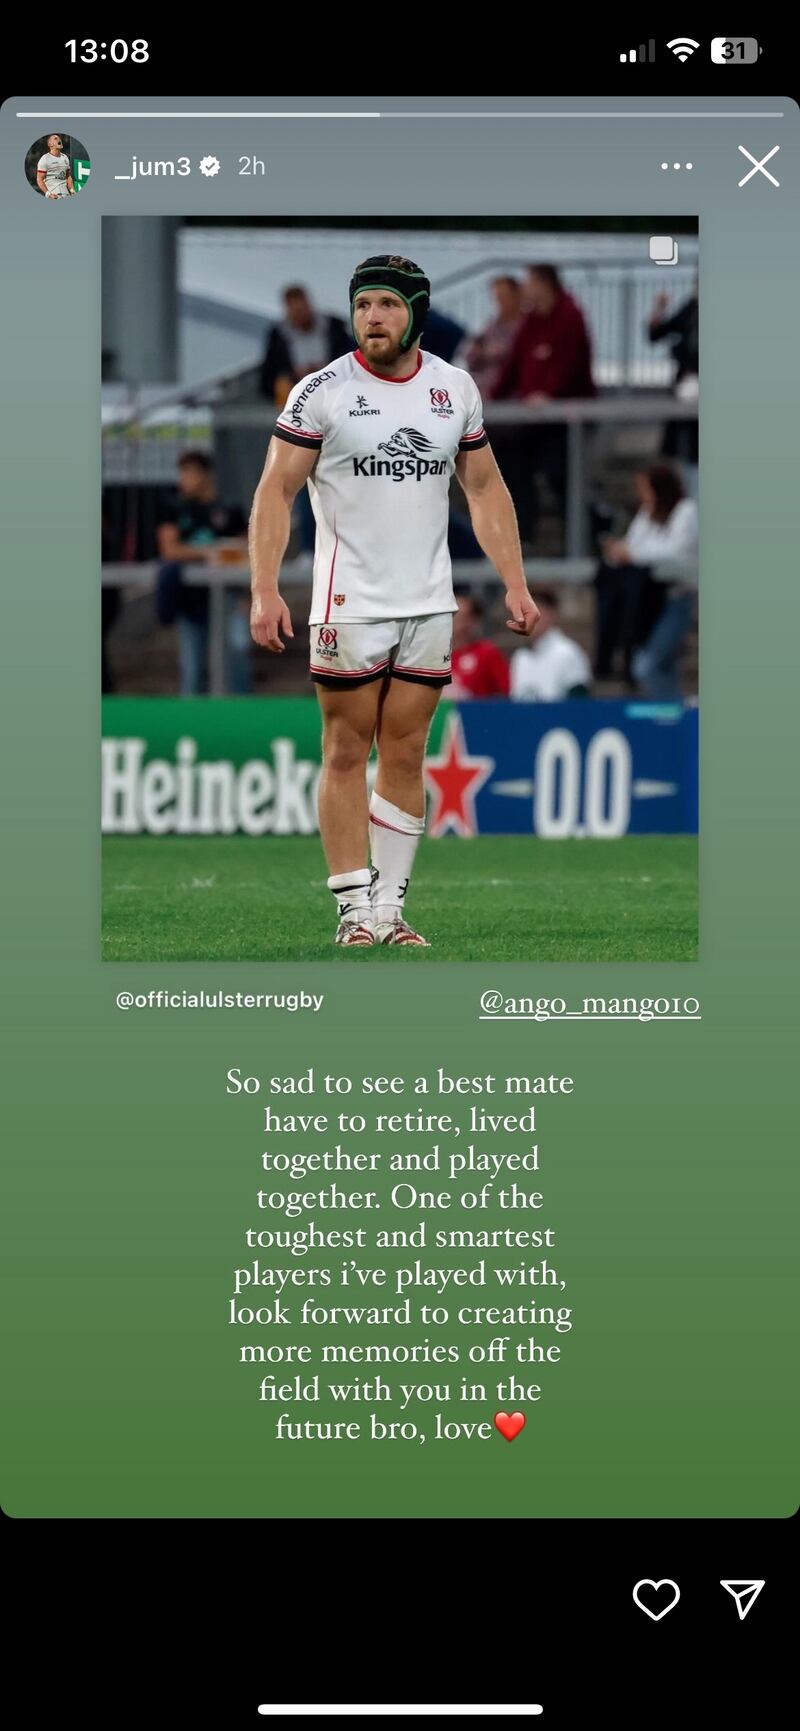 An Instagram story slate from James Hume's Instagram sharing a message saying 'So sad to see a best mate have to retire, lived together and played together. One of the toughest and smartest players I've played with, looking forward to creating more memories off the field with you in the future bro, love (red heart emoji)